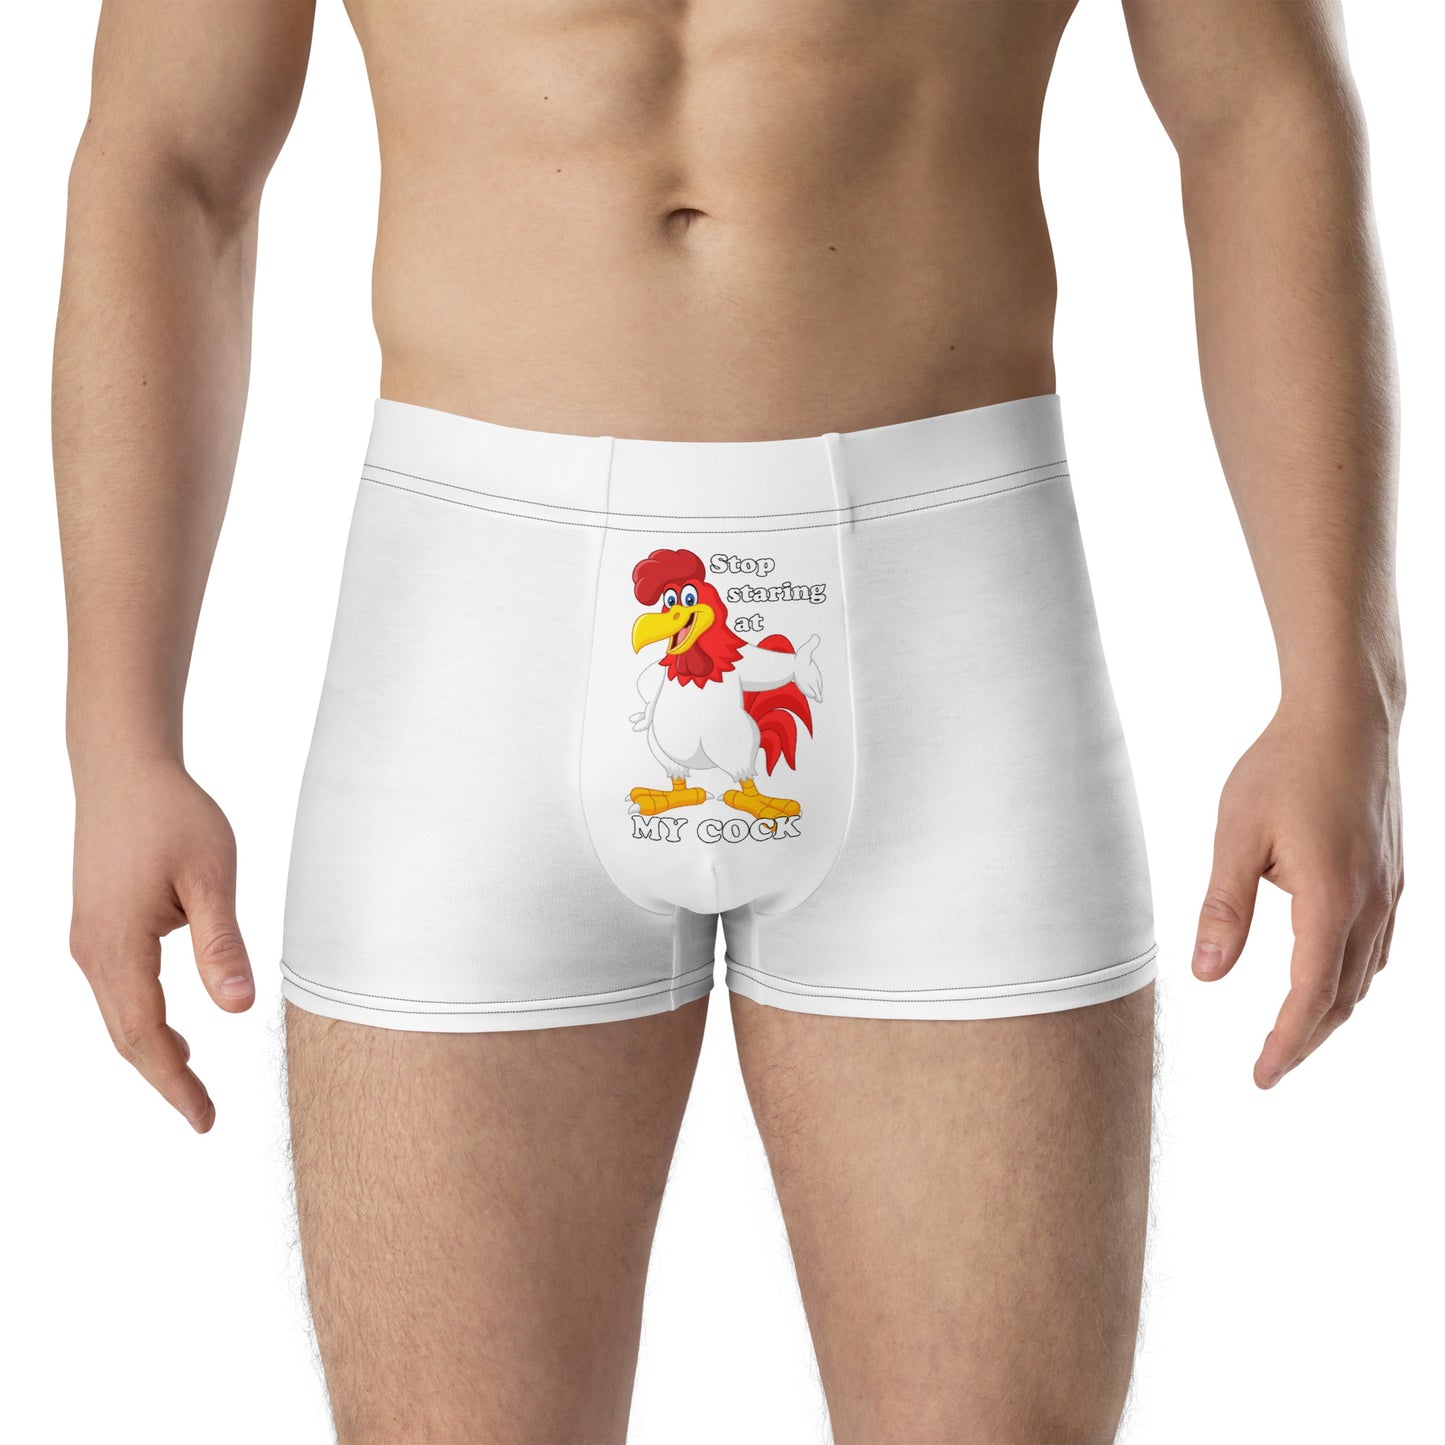 man with white boxer with picture of rooster and text "stop looking at my cock"